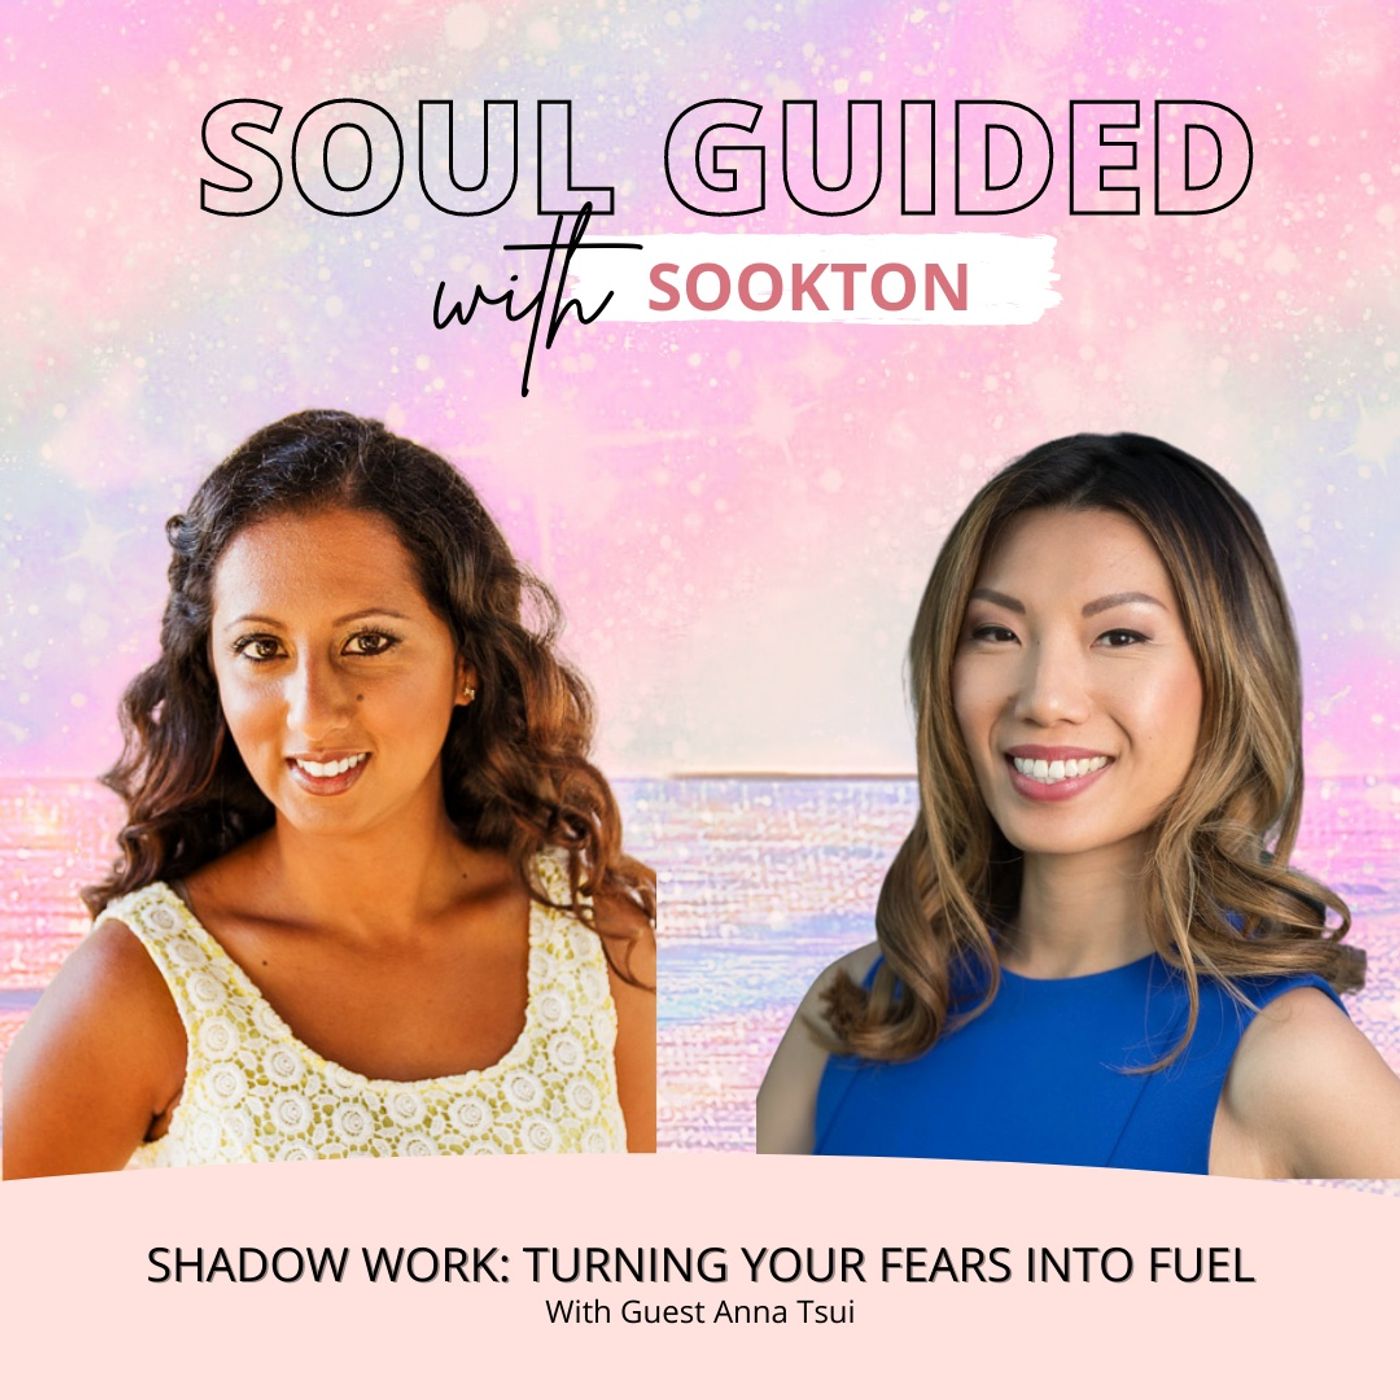 Turning Fears into Fuel with Anna Tsui